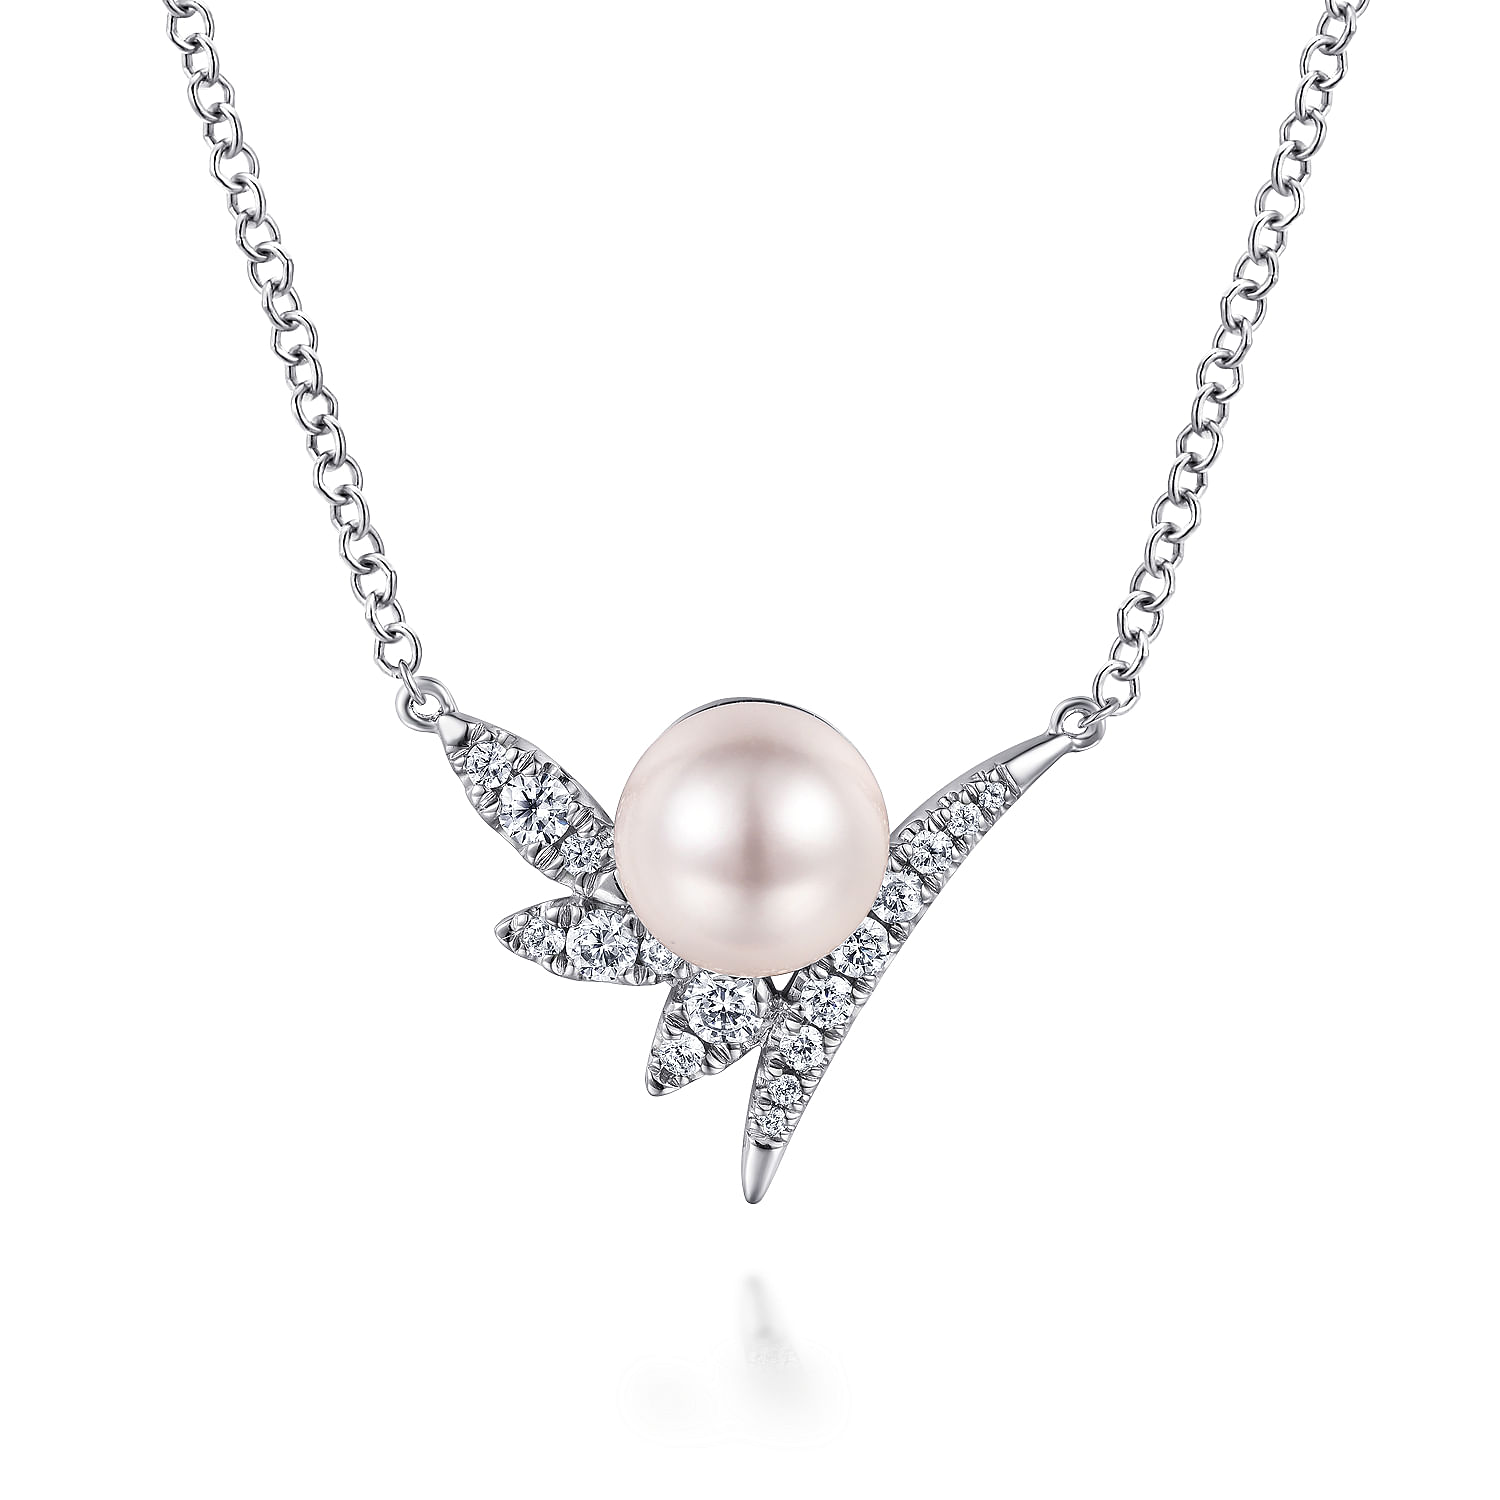 14K White Gold Diamond and Pearl Necklace